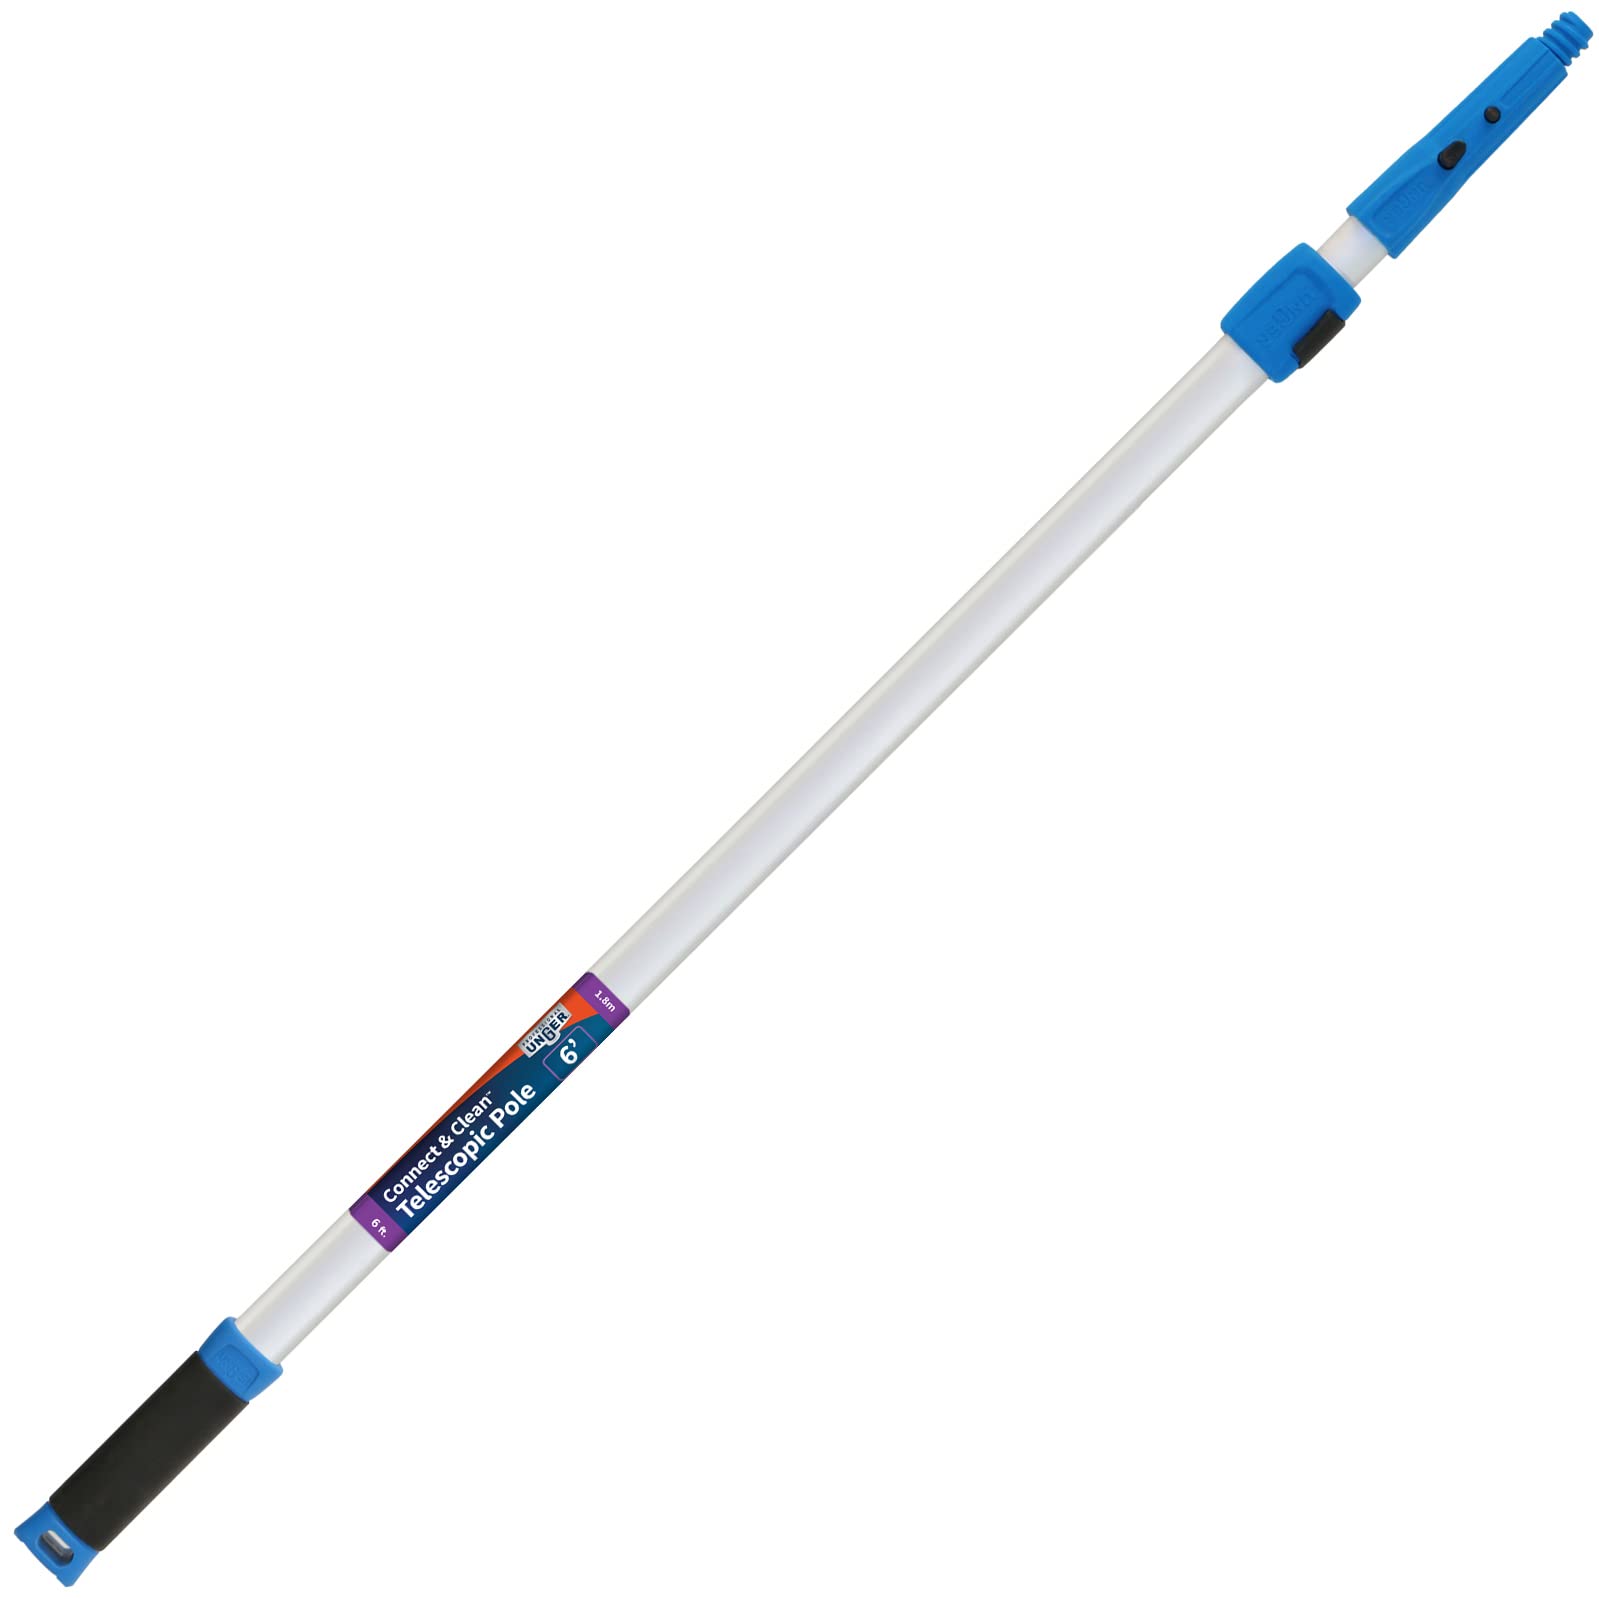 Unger Professional Connect & Clean 3-6 Foot Telescoping Extension  Multi-Purpose Pole with Quick-Flip